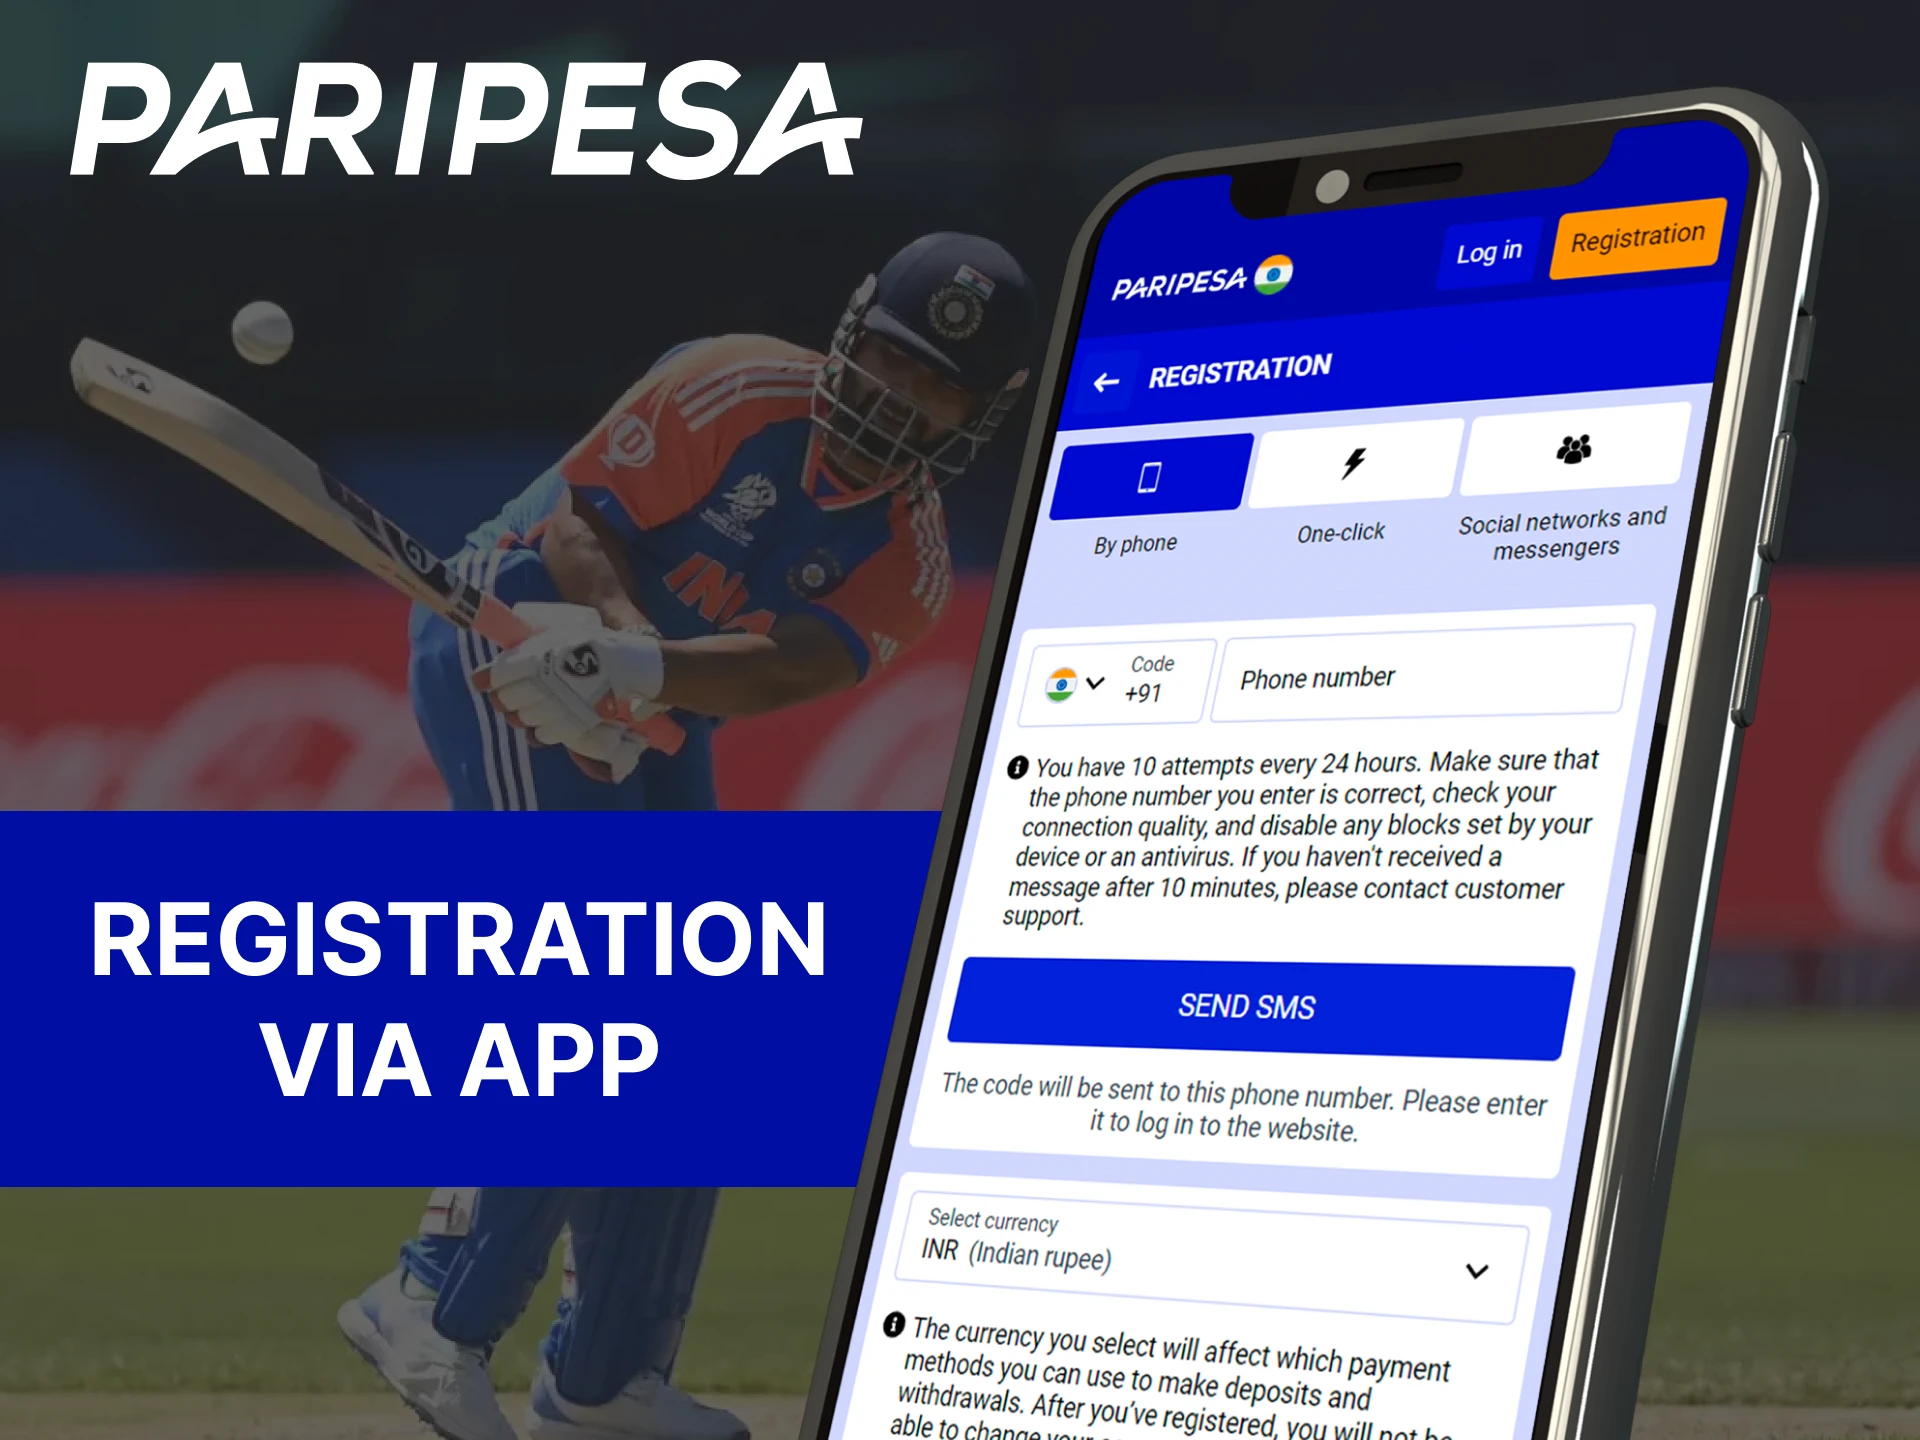 If you have downloaded the Paripesa mobile app, you can register there.